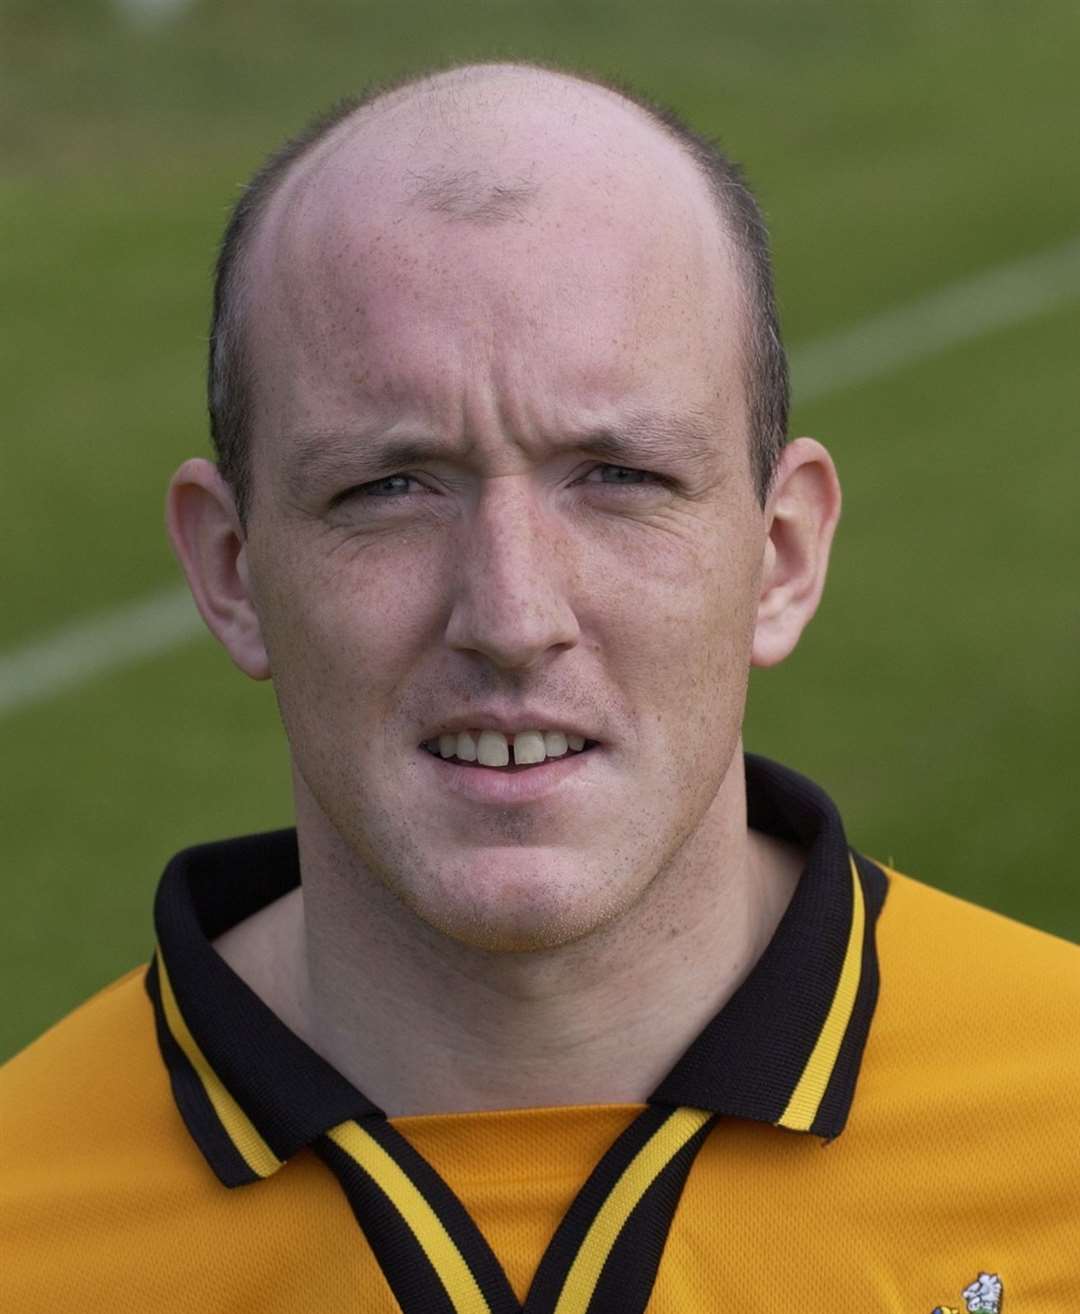 Paul Foley during his Maidstone United playing days, where he captained them to the double